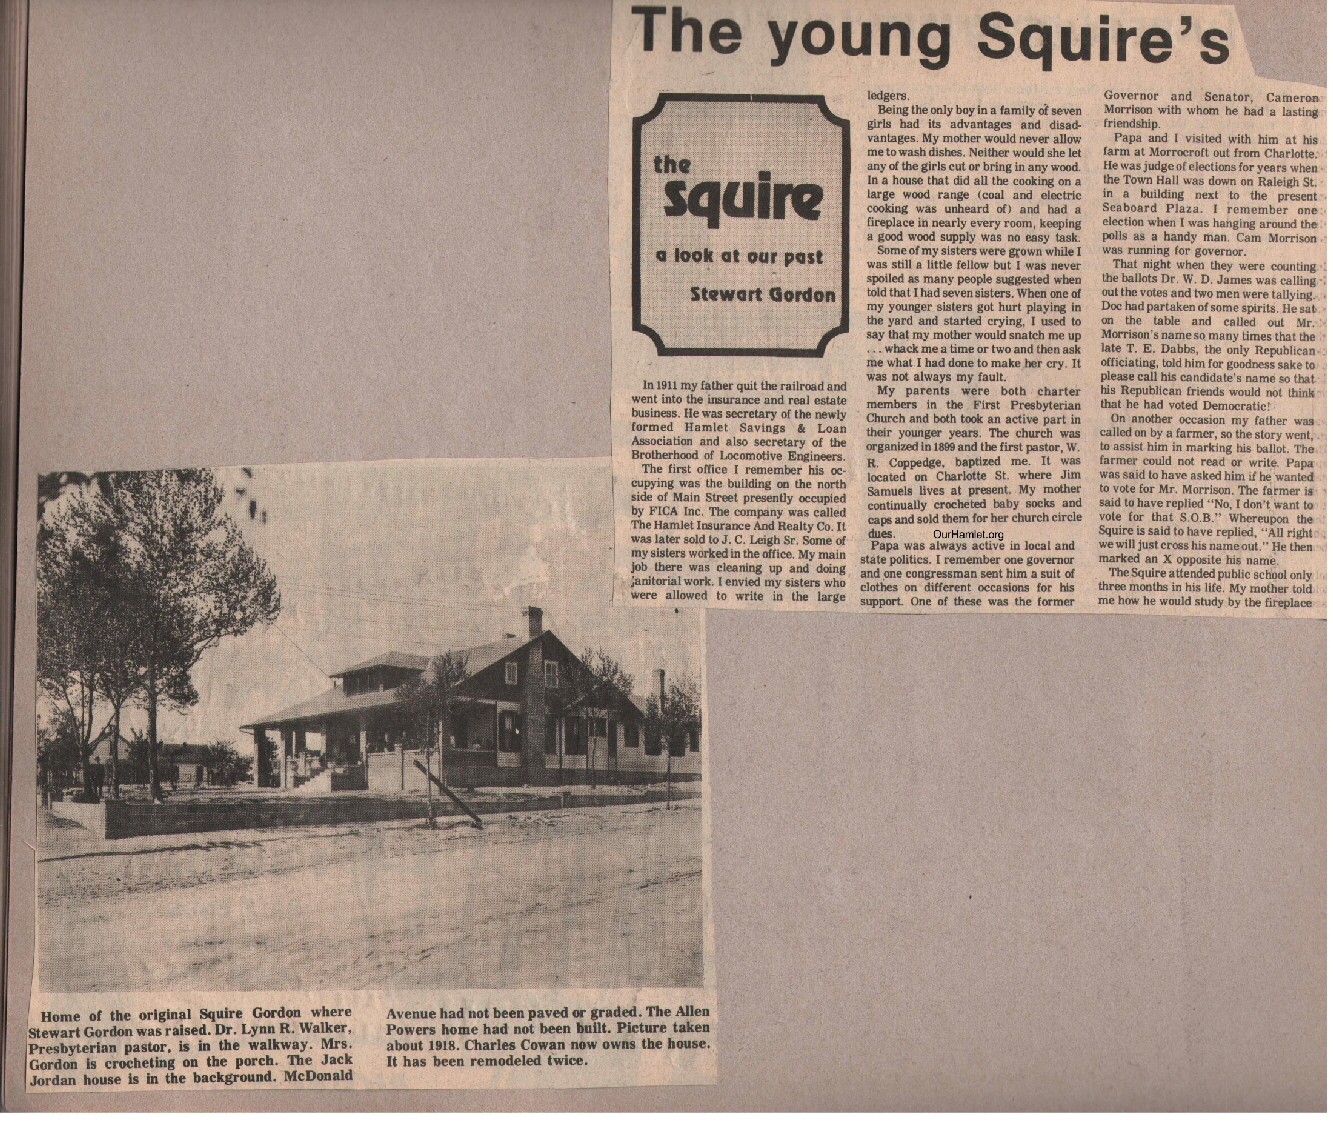 The Squire - The young Squire's relationship with his father a OH